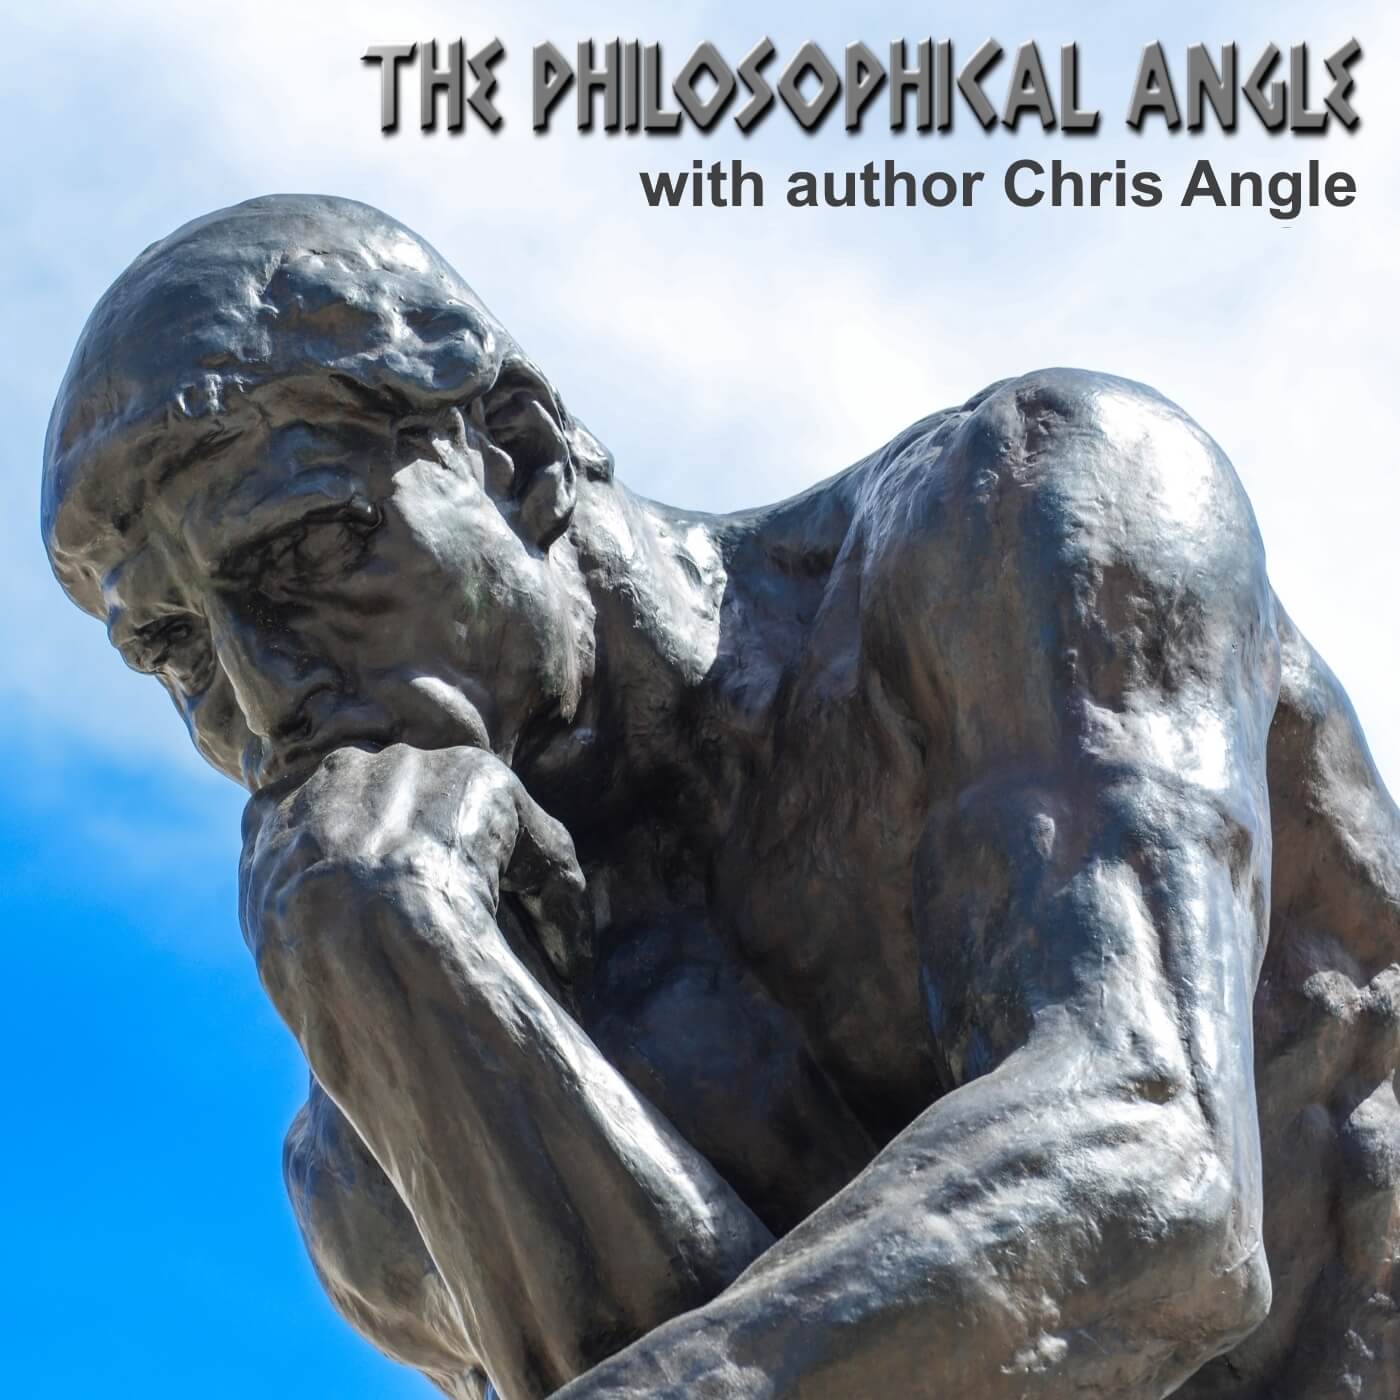 The Philosophical Angle